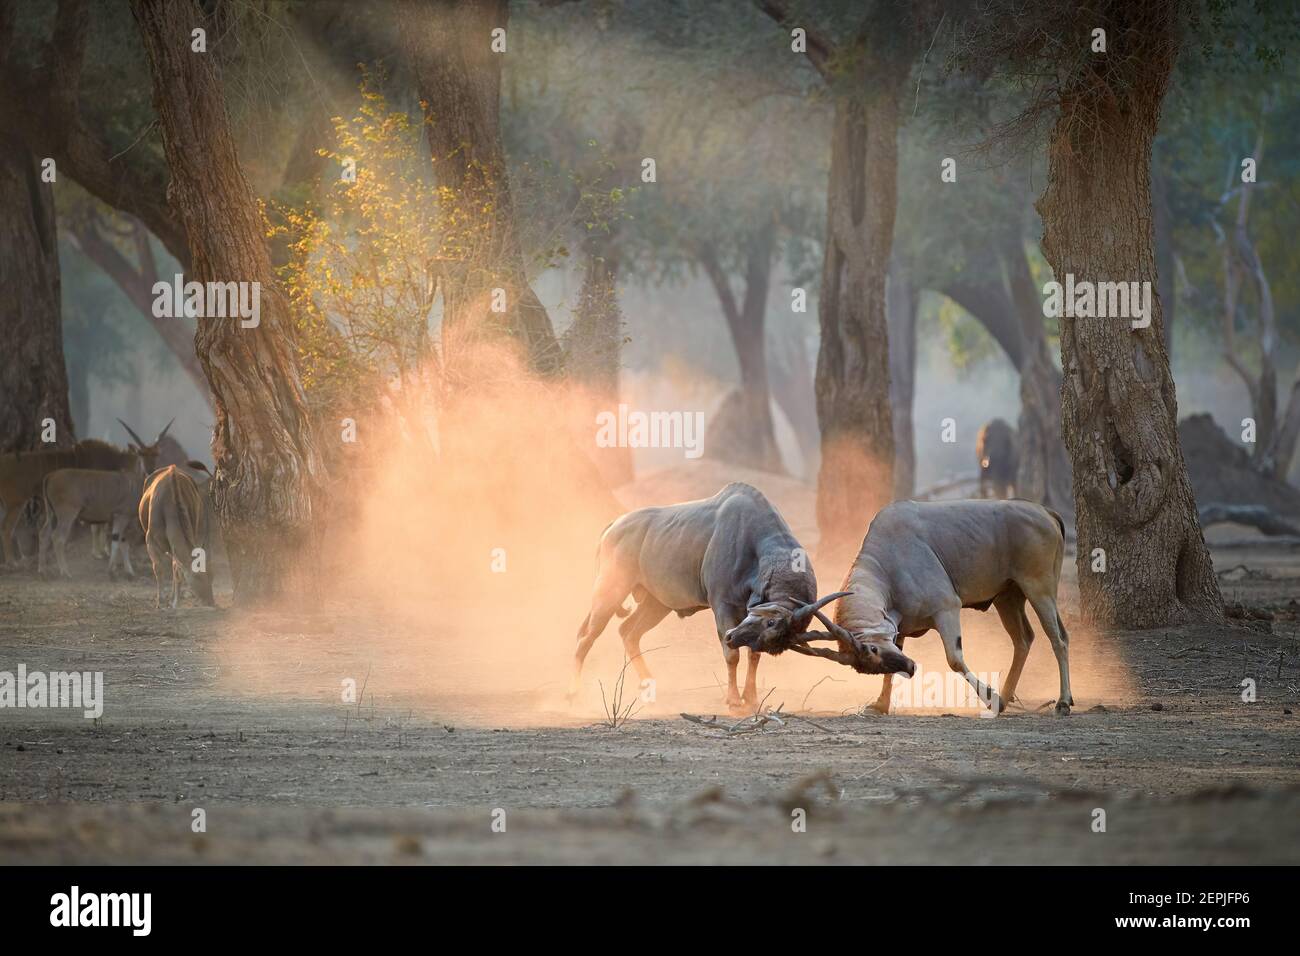 Two large male Eland antelopes, Taurotragus oryx, fighting in an orange  cloud of dust backlighted by rays of morning sun. Mana Pools. Stock Photo